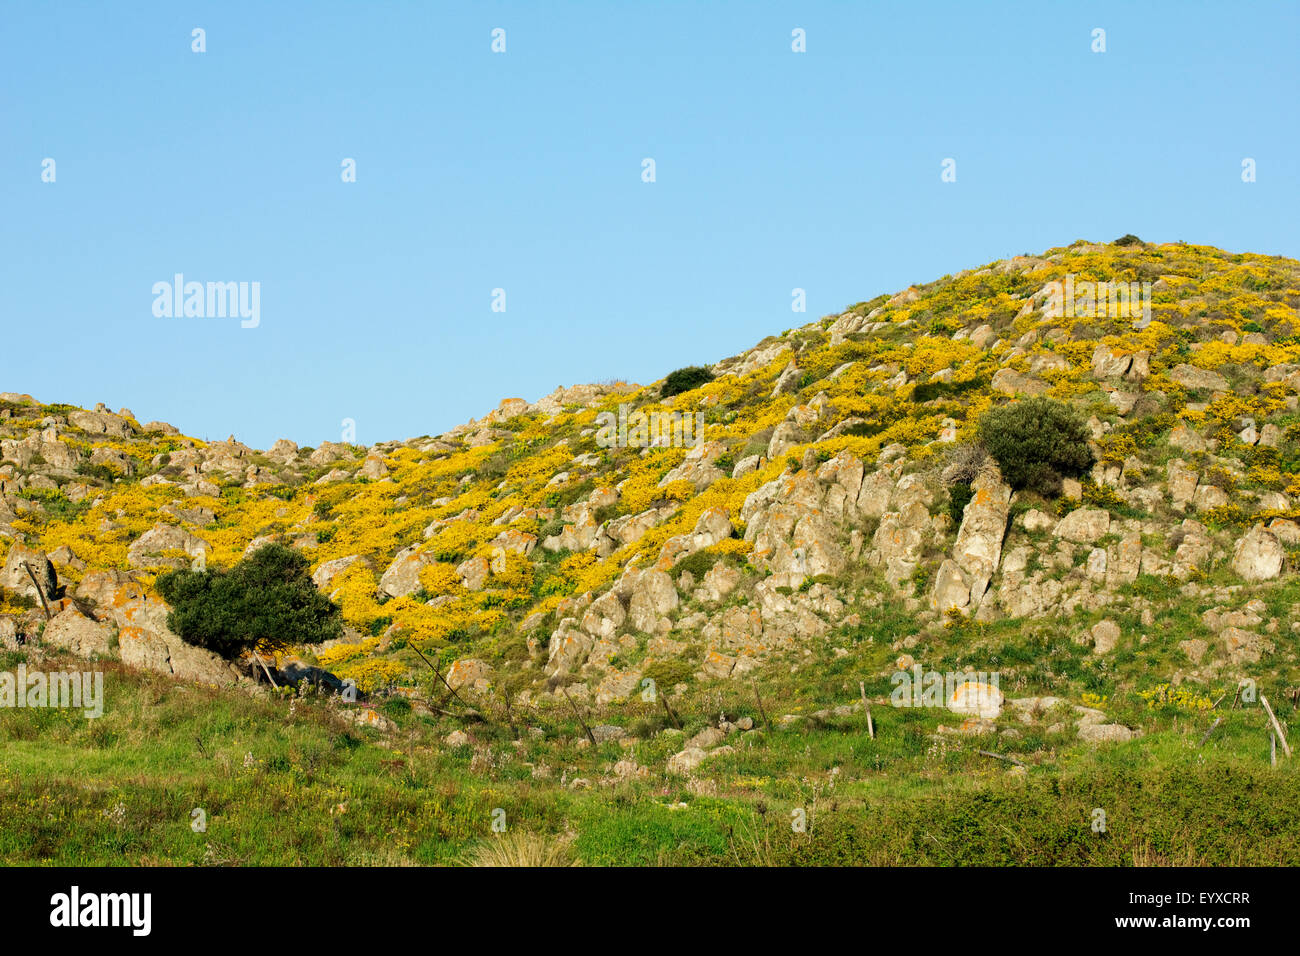 Field of bloomed (sp)Sarcopoterium spinosum bush field on a curvy hill, in spring time. Lemnos or Limnos island, Greece. Stock Photo